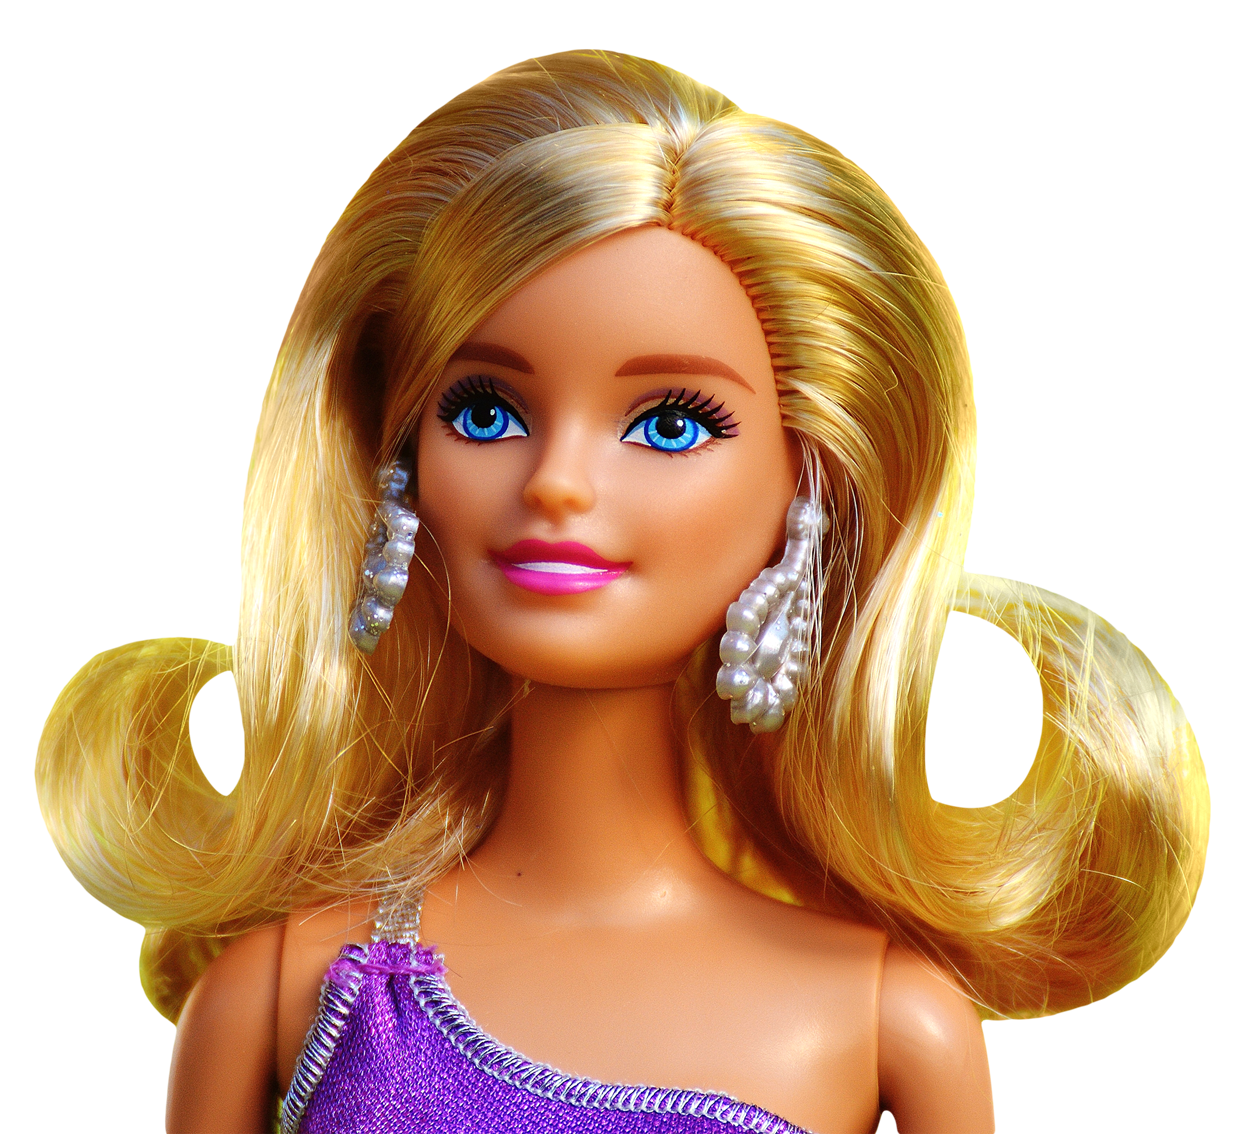 Barbie Doll Hairstyle PNG